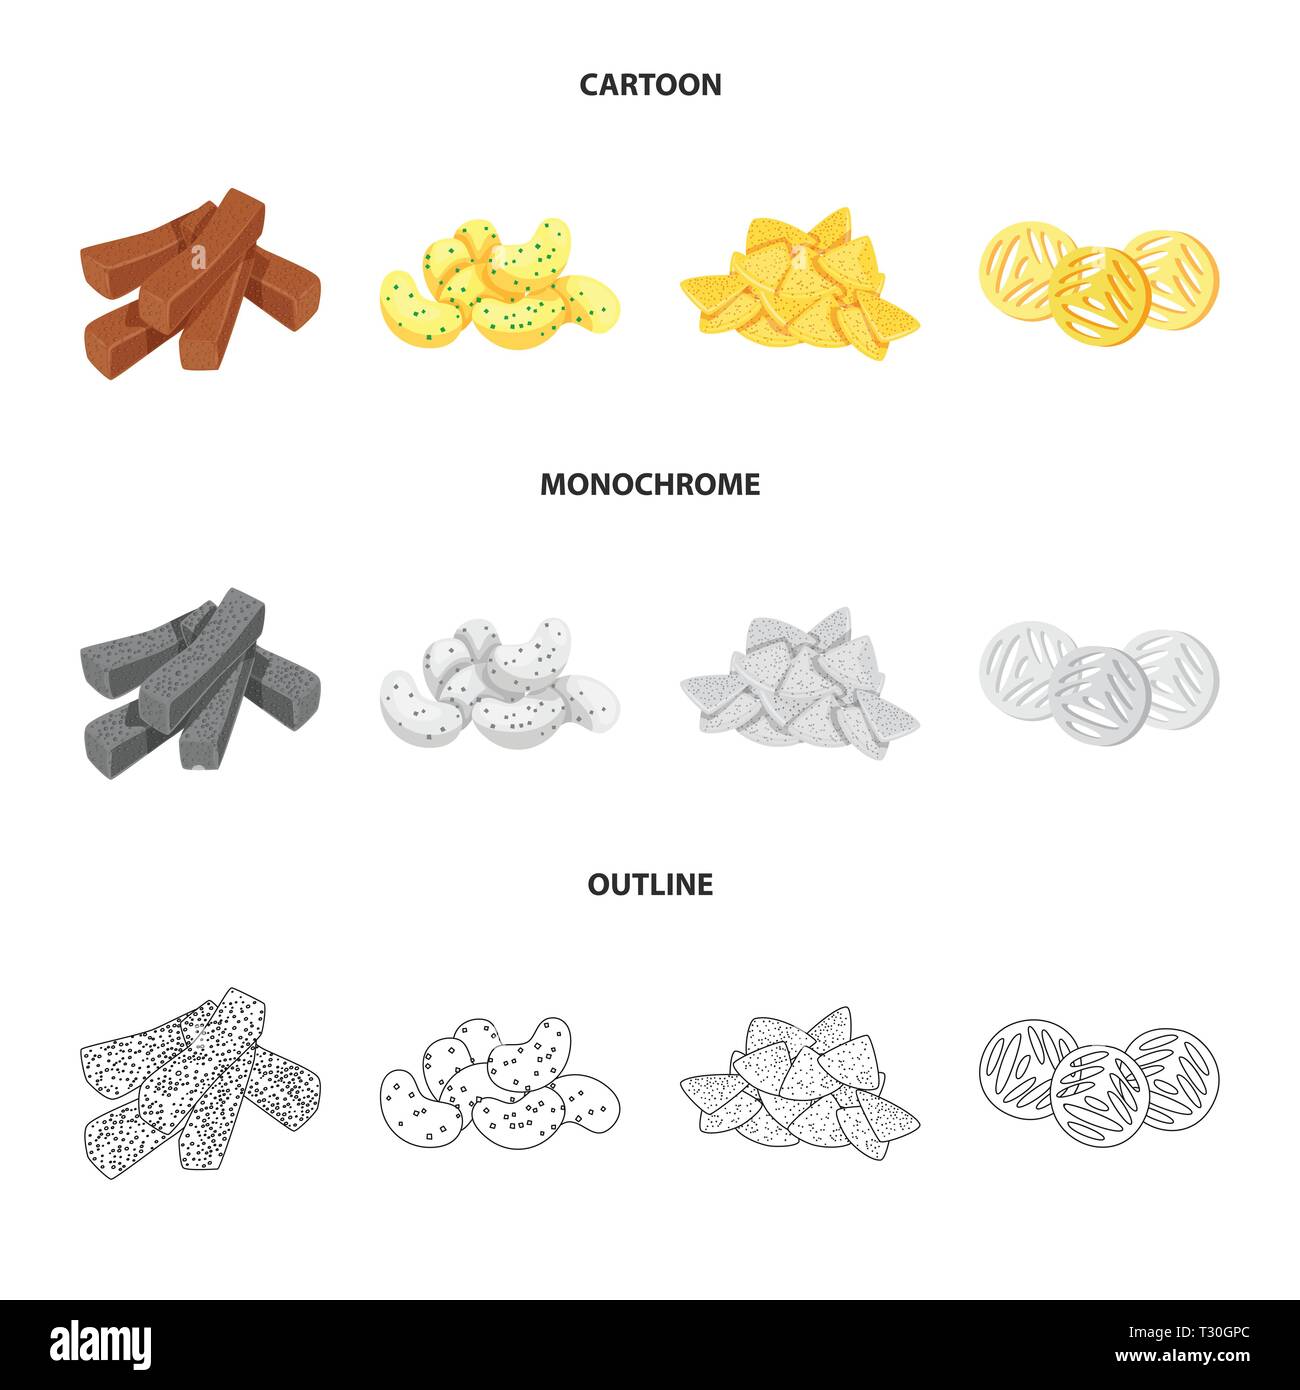 croutons,corn,chip,bread,sticks,potato,snack,bowl,crackers,sweet,yellow,soup,organic,crispy,slice,crouton,crisp,cube,agricultural,salty,toast,appetizer,brown,texture,Oktoberfest,bar,party,cooking,food,crunchy,baked,flavor,product,menu,set,vector,icon,illustration,isolated,collection,design,element,graphic,sign Vector Vectors , Stock Vector